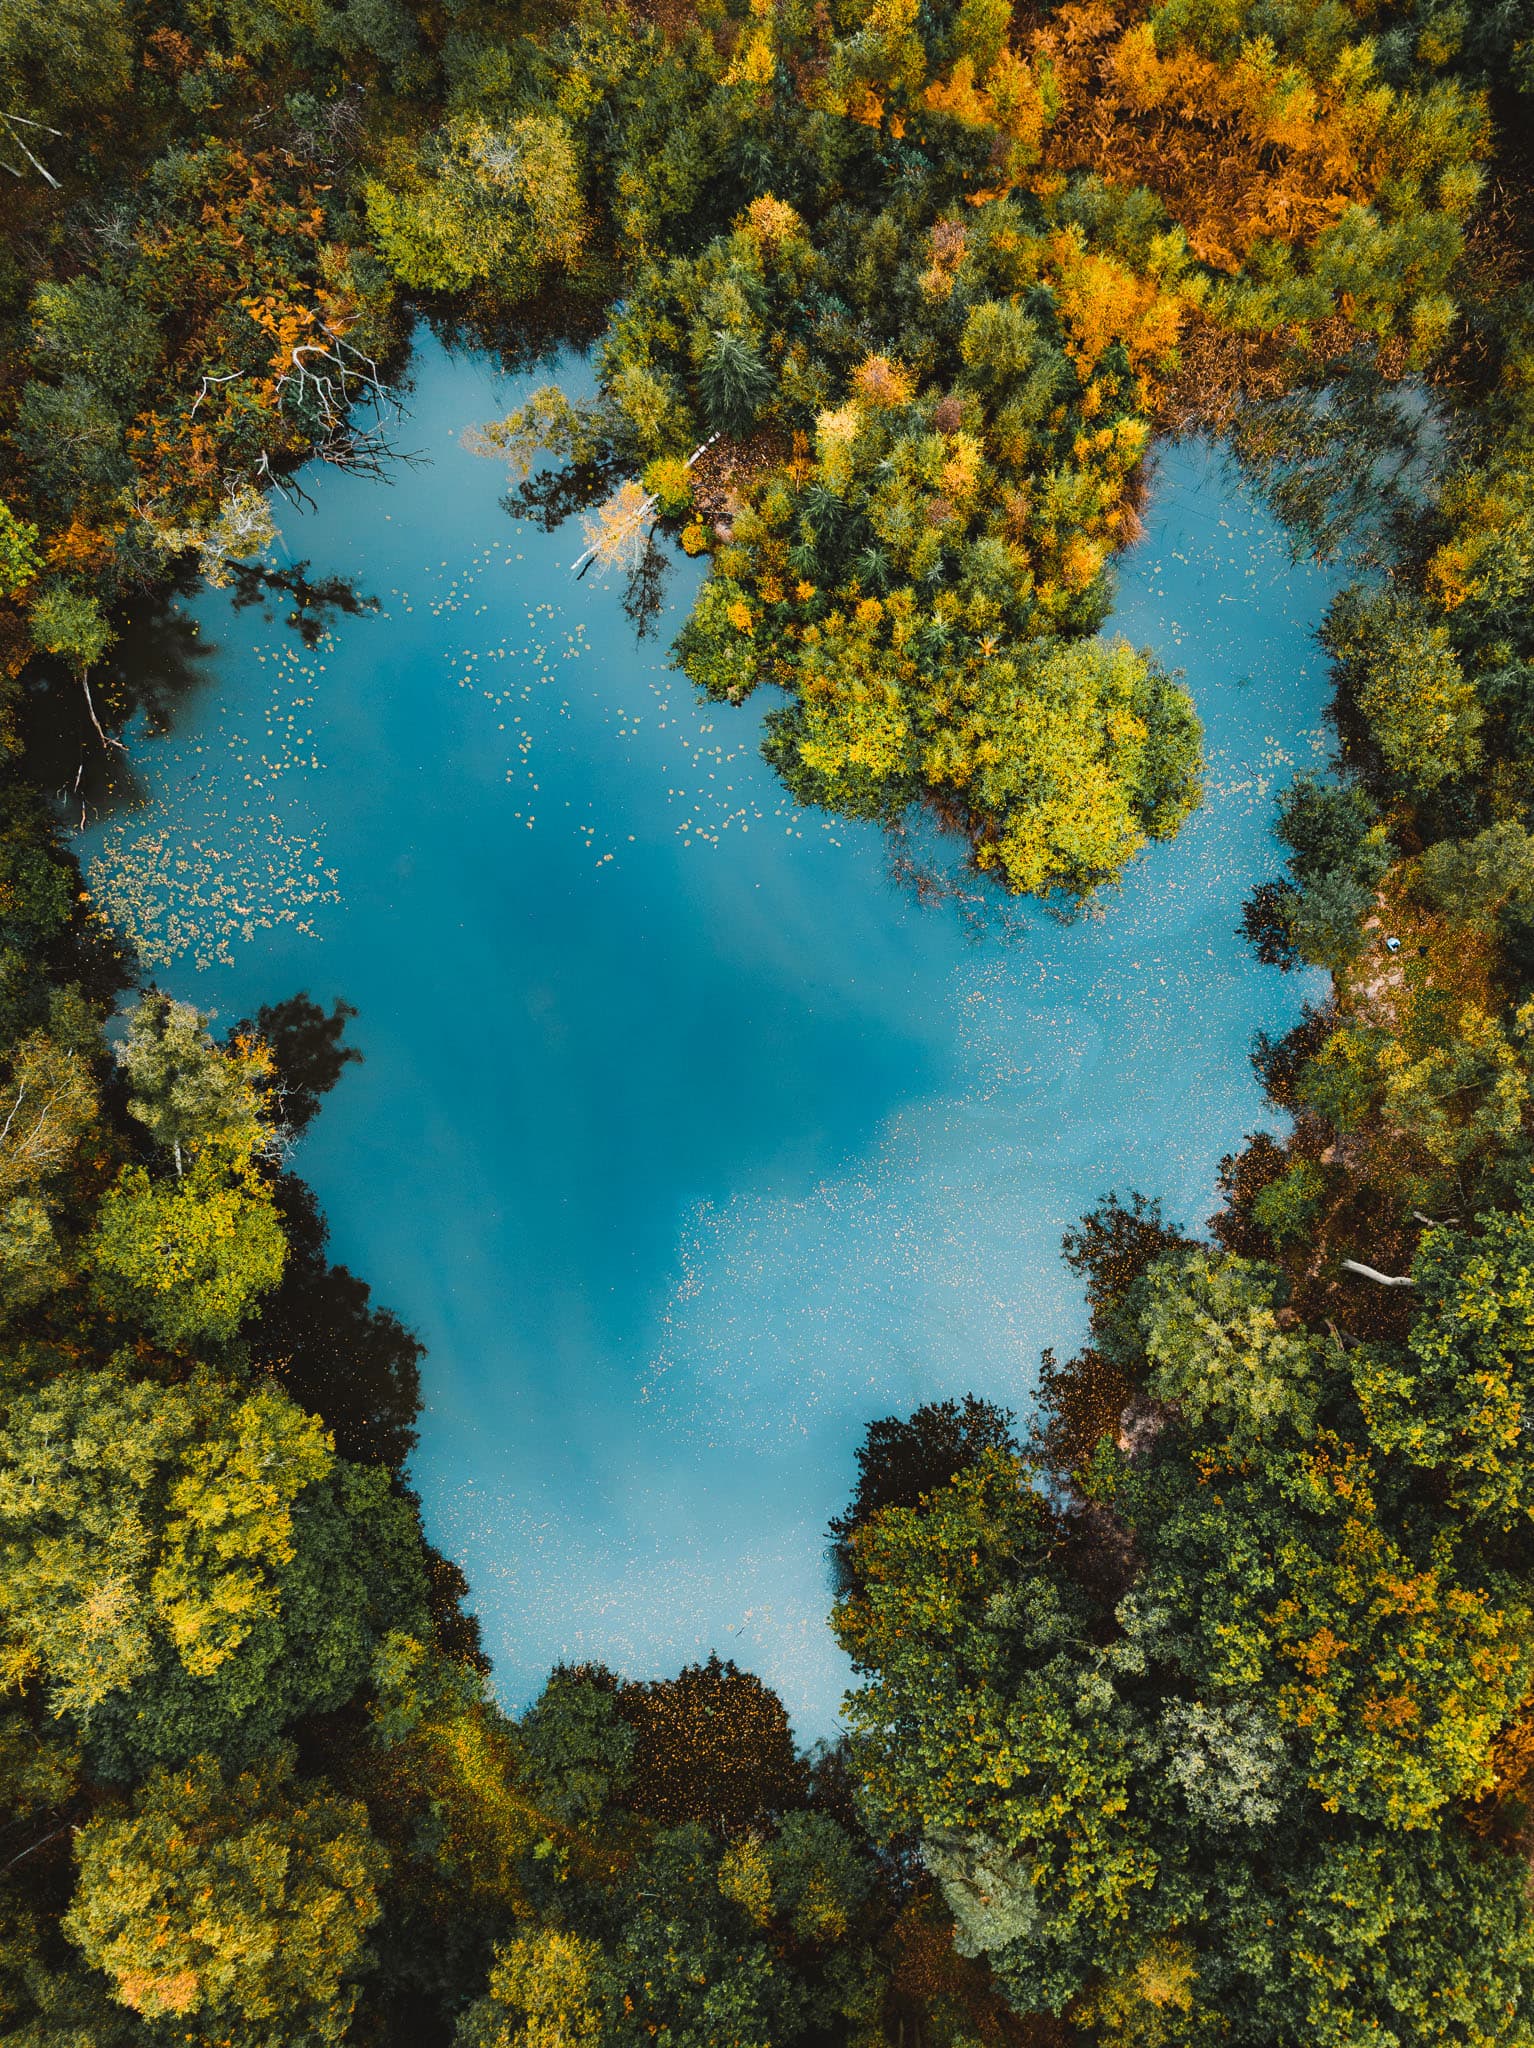 A top down aerial shot of a lake in a forest in shape vaguely resembling a blue heart with the sky reflected in the murky waters and framed by autumn foliage in deep colours of green, yellow and orange